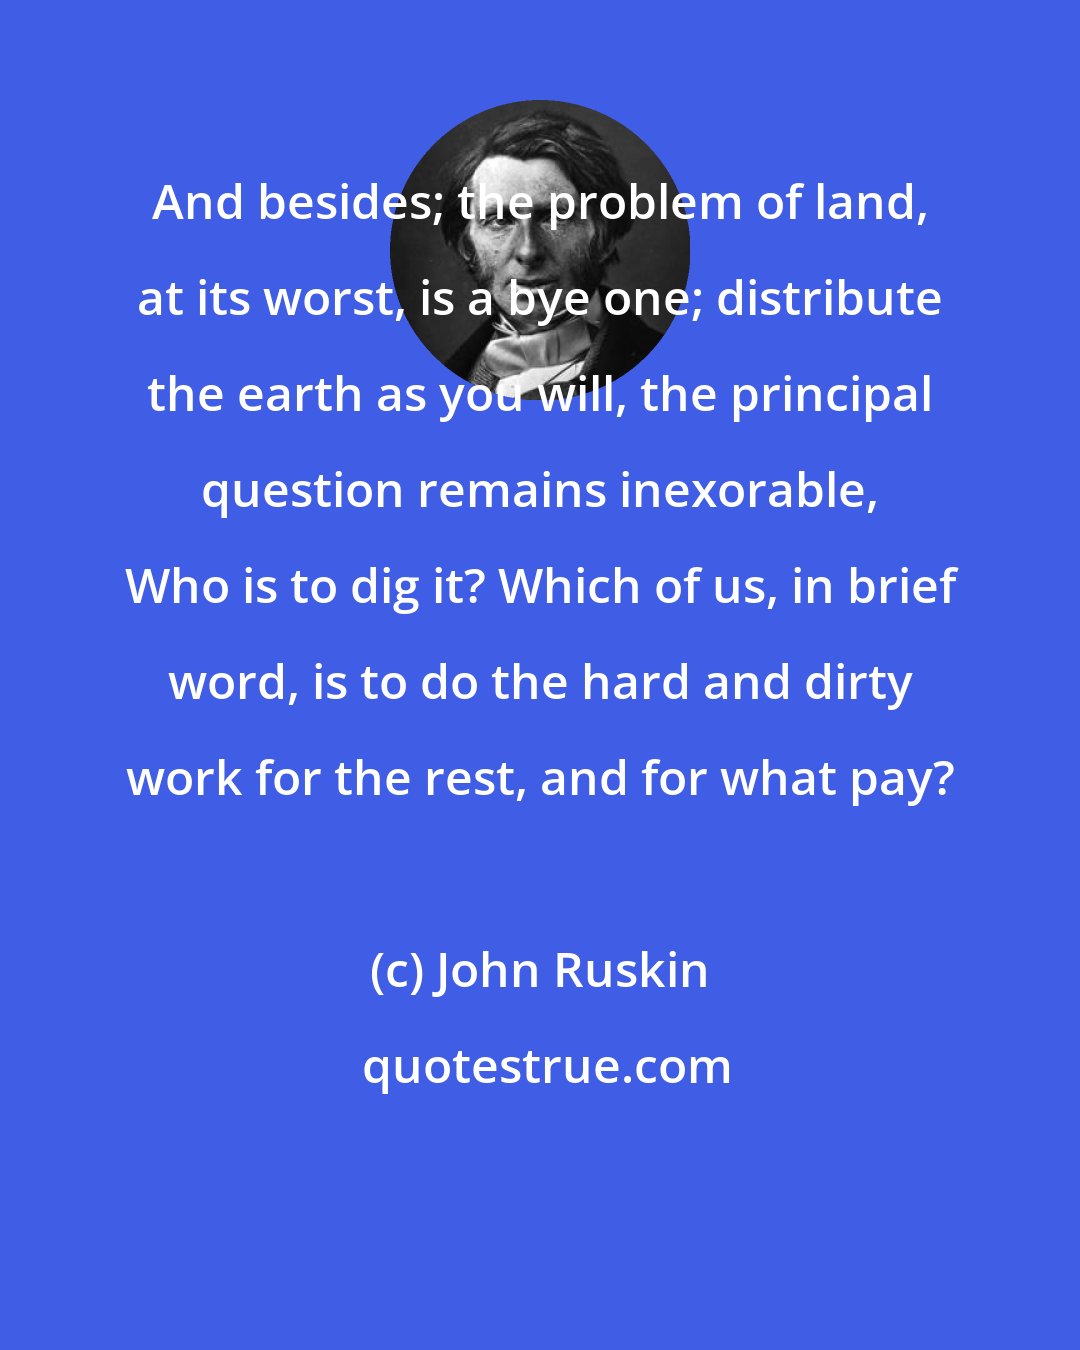 John Ruskin: And besides; the problem of land, at its worst, is a bye one; distribute the earth as you will, the principal question remains inexorable, Who is to dig it? Which of us, in brief word, is to do the hard and dirty work for the rest, and for what pay?